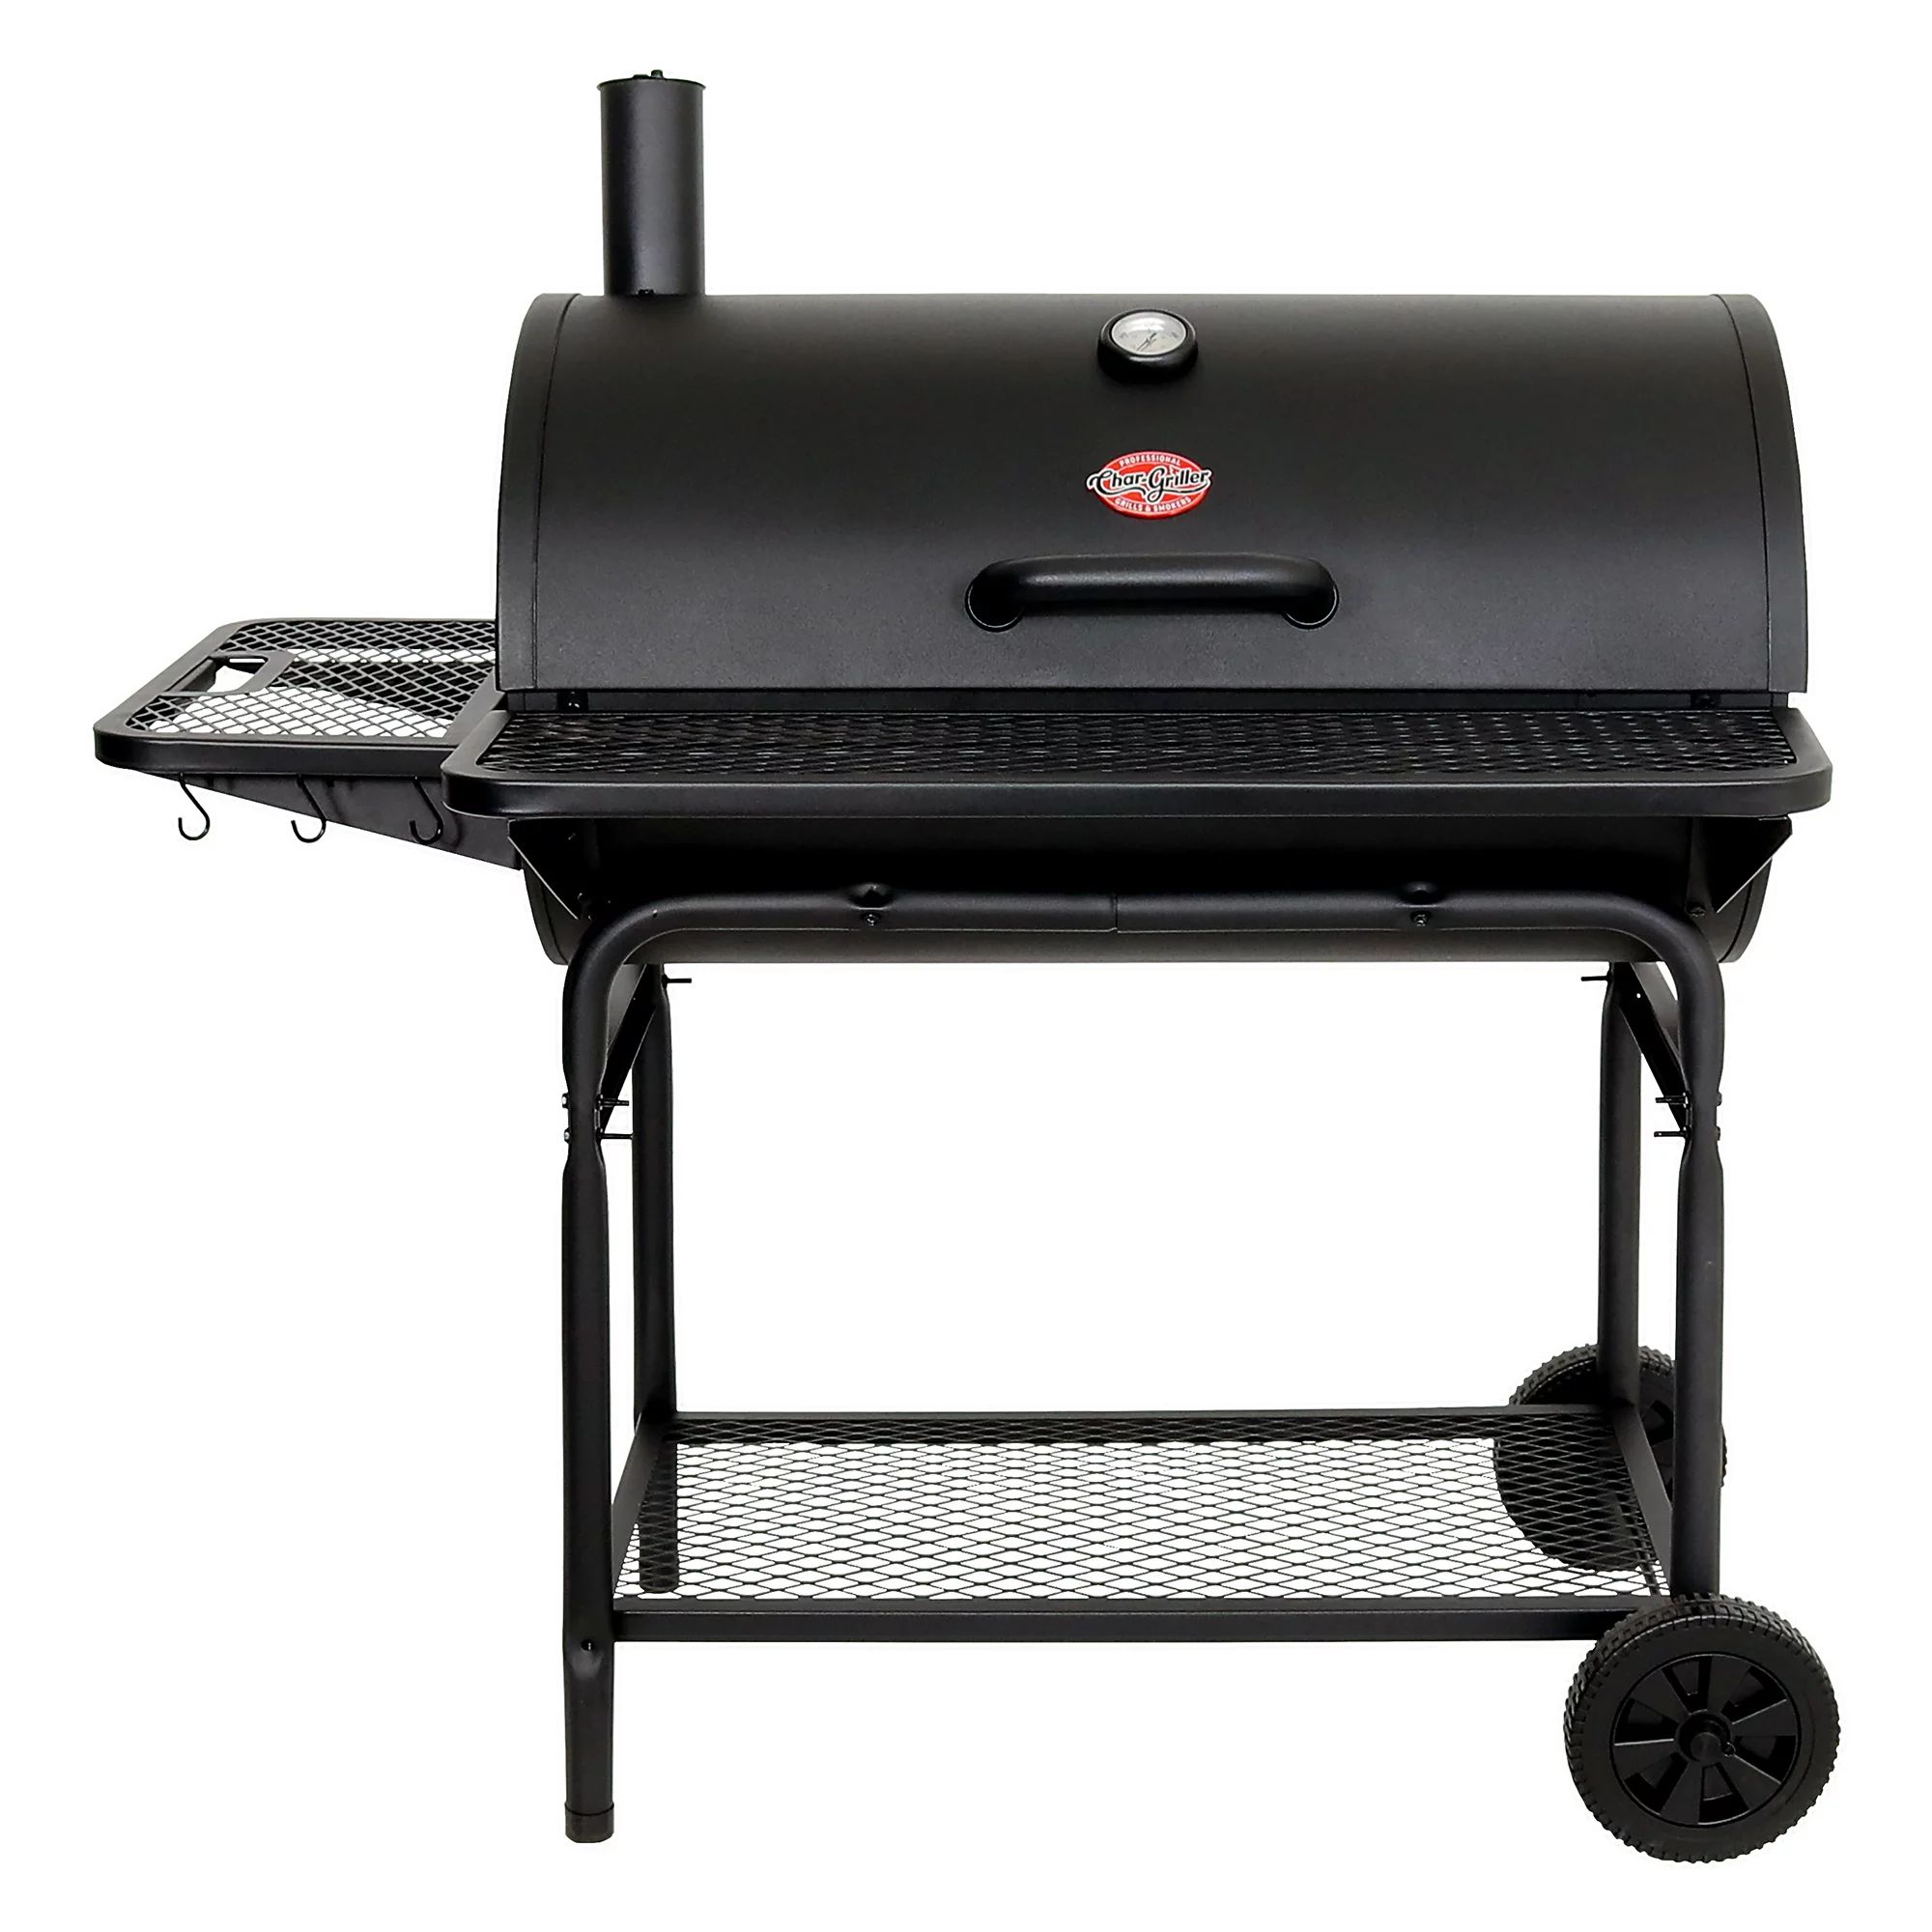 Char-Griller 2735 Pro Deluxe XL Charcoal Grill, Black | Walmart (US)